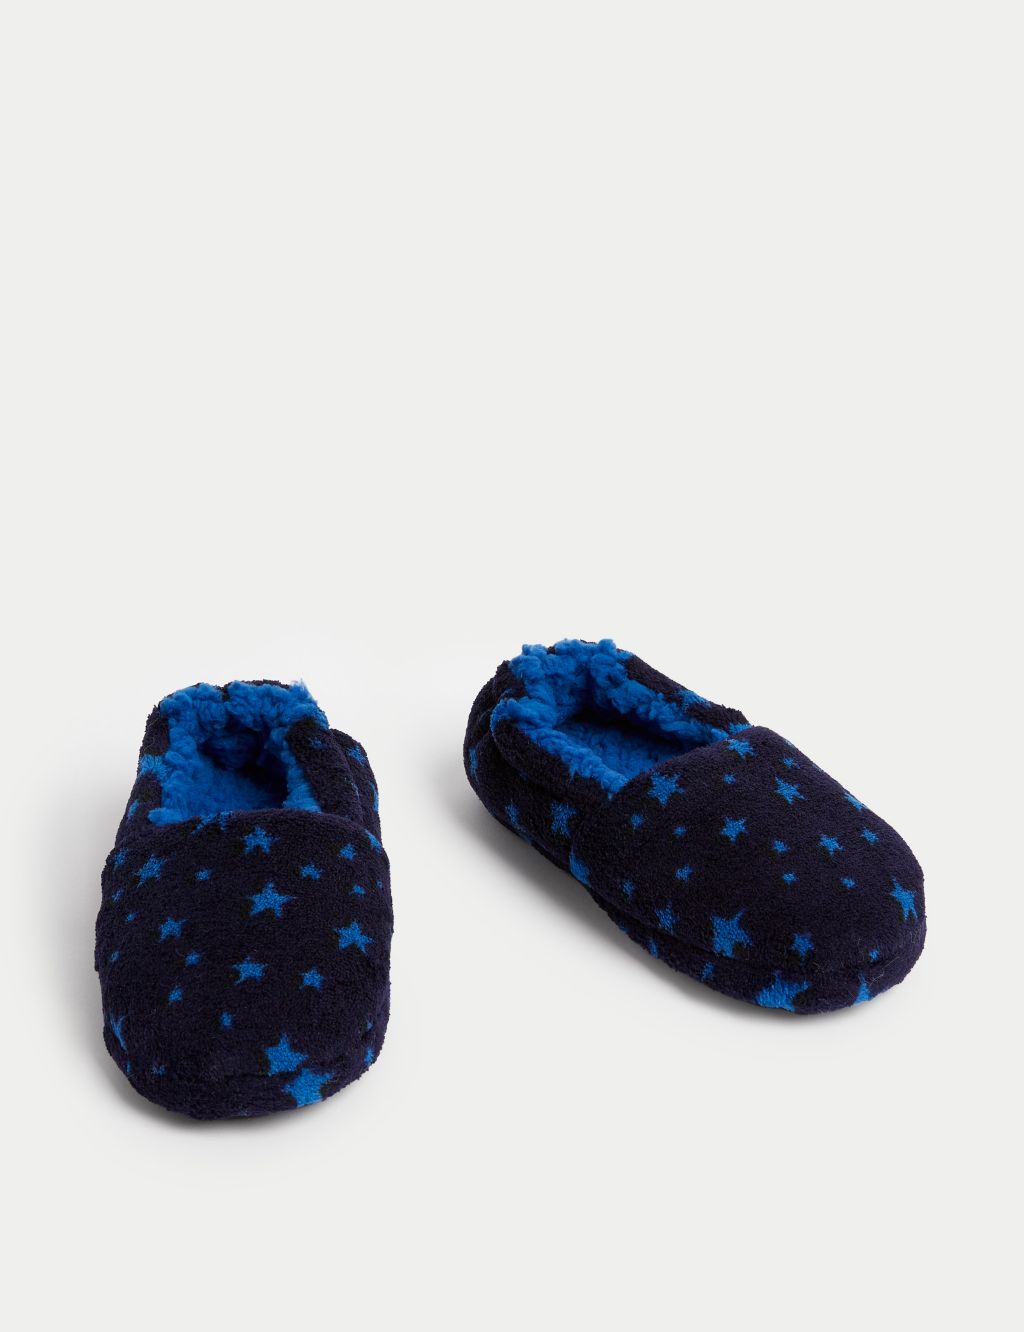 Kids' Star Print Slippers (13 Small - 7 Large) image 2